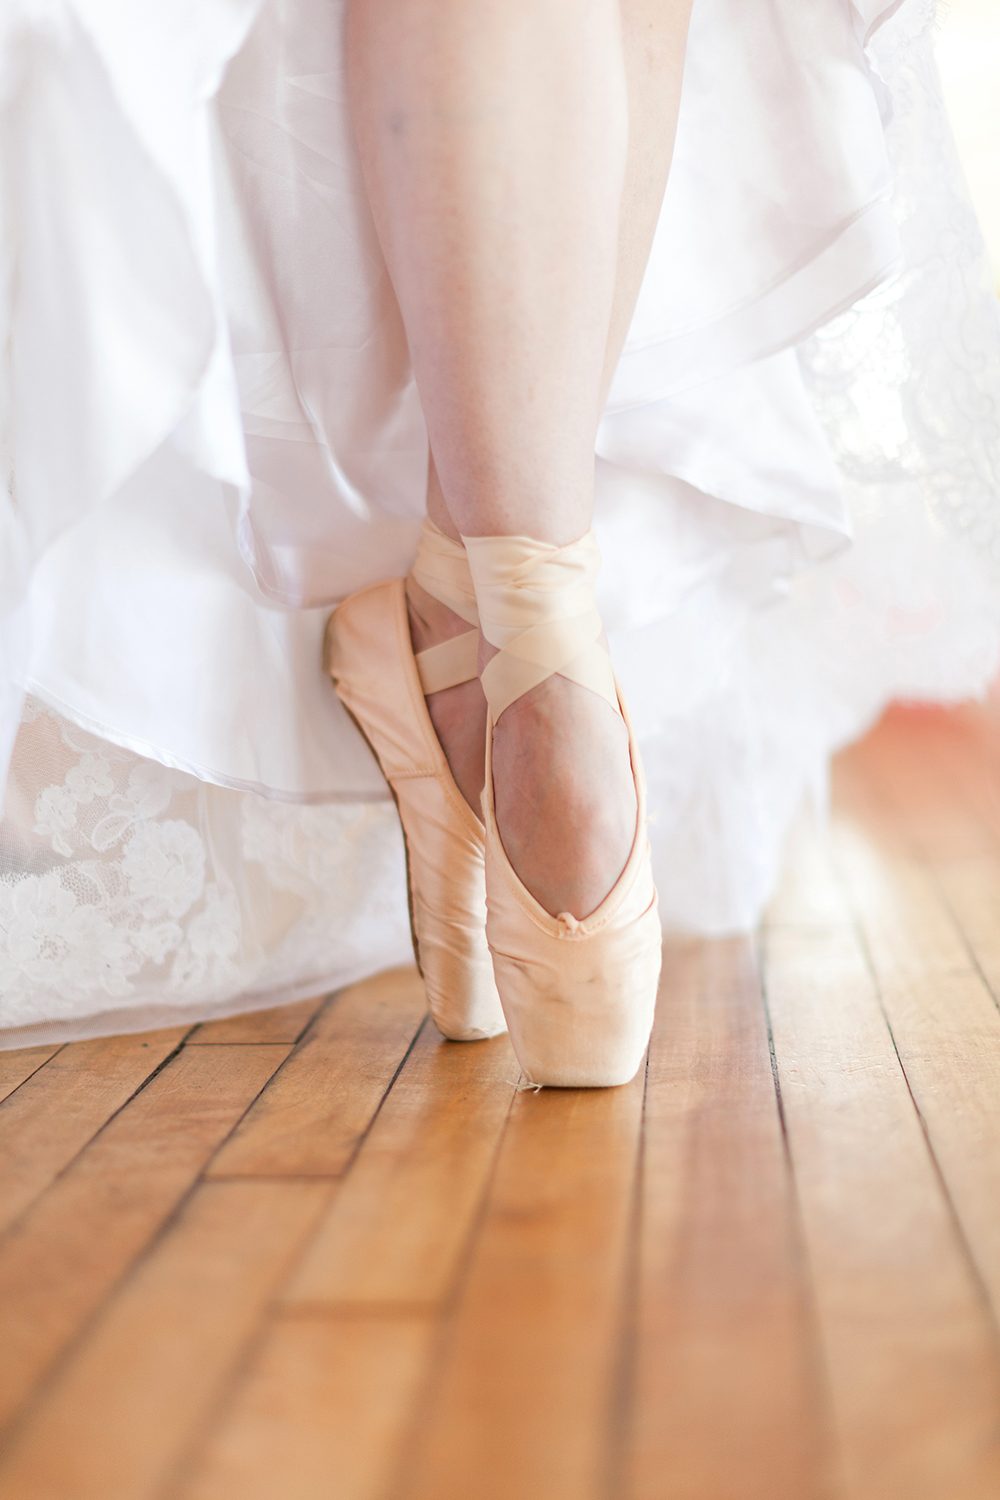 bridal-ballet-shoot-by-love-by-serena